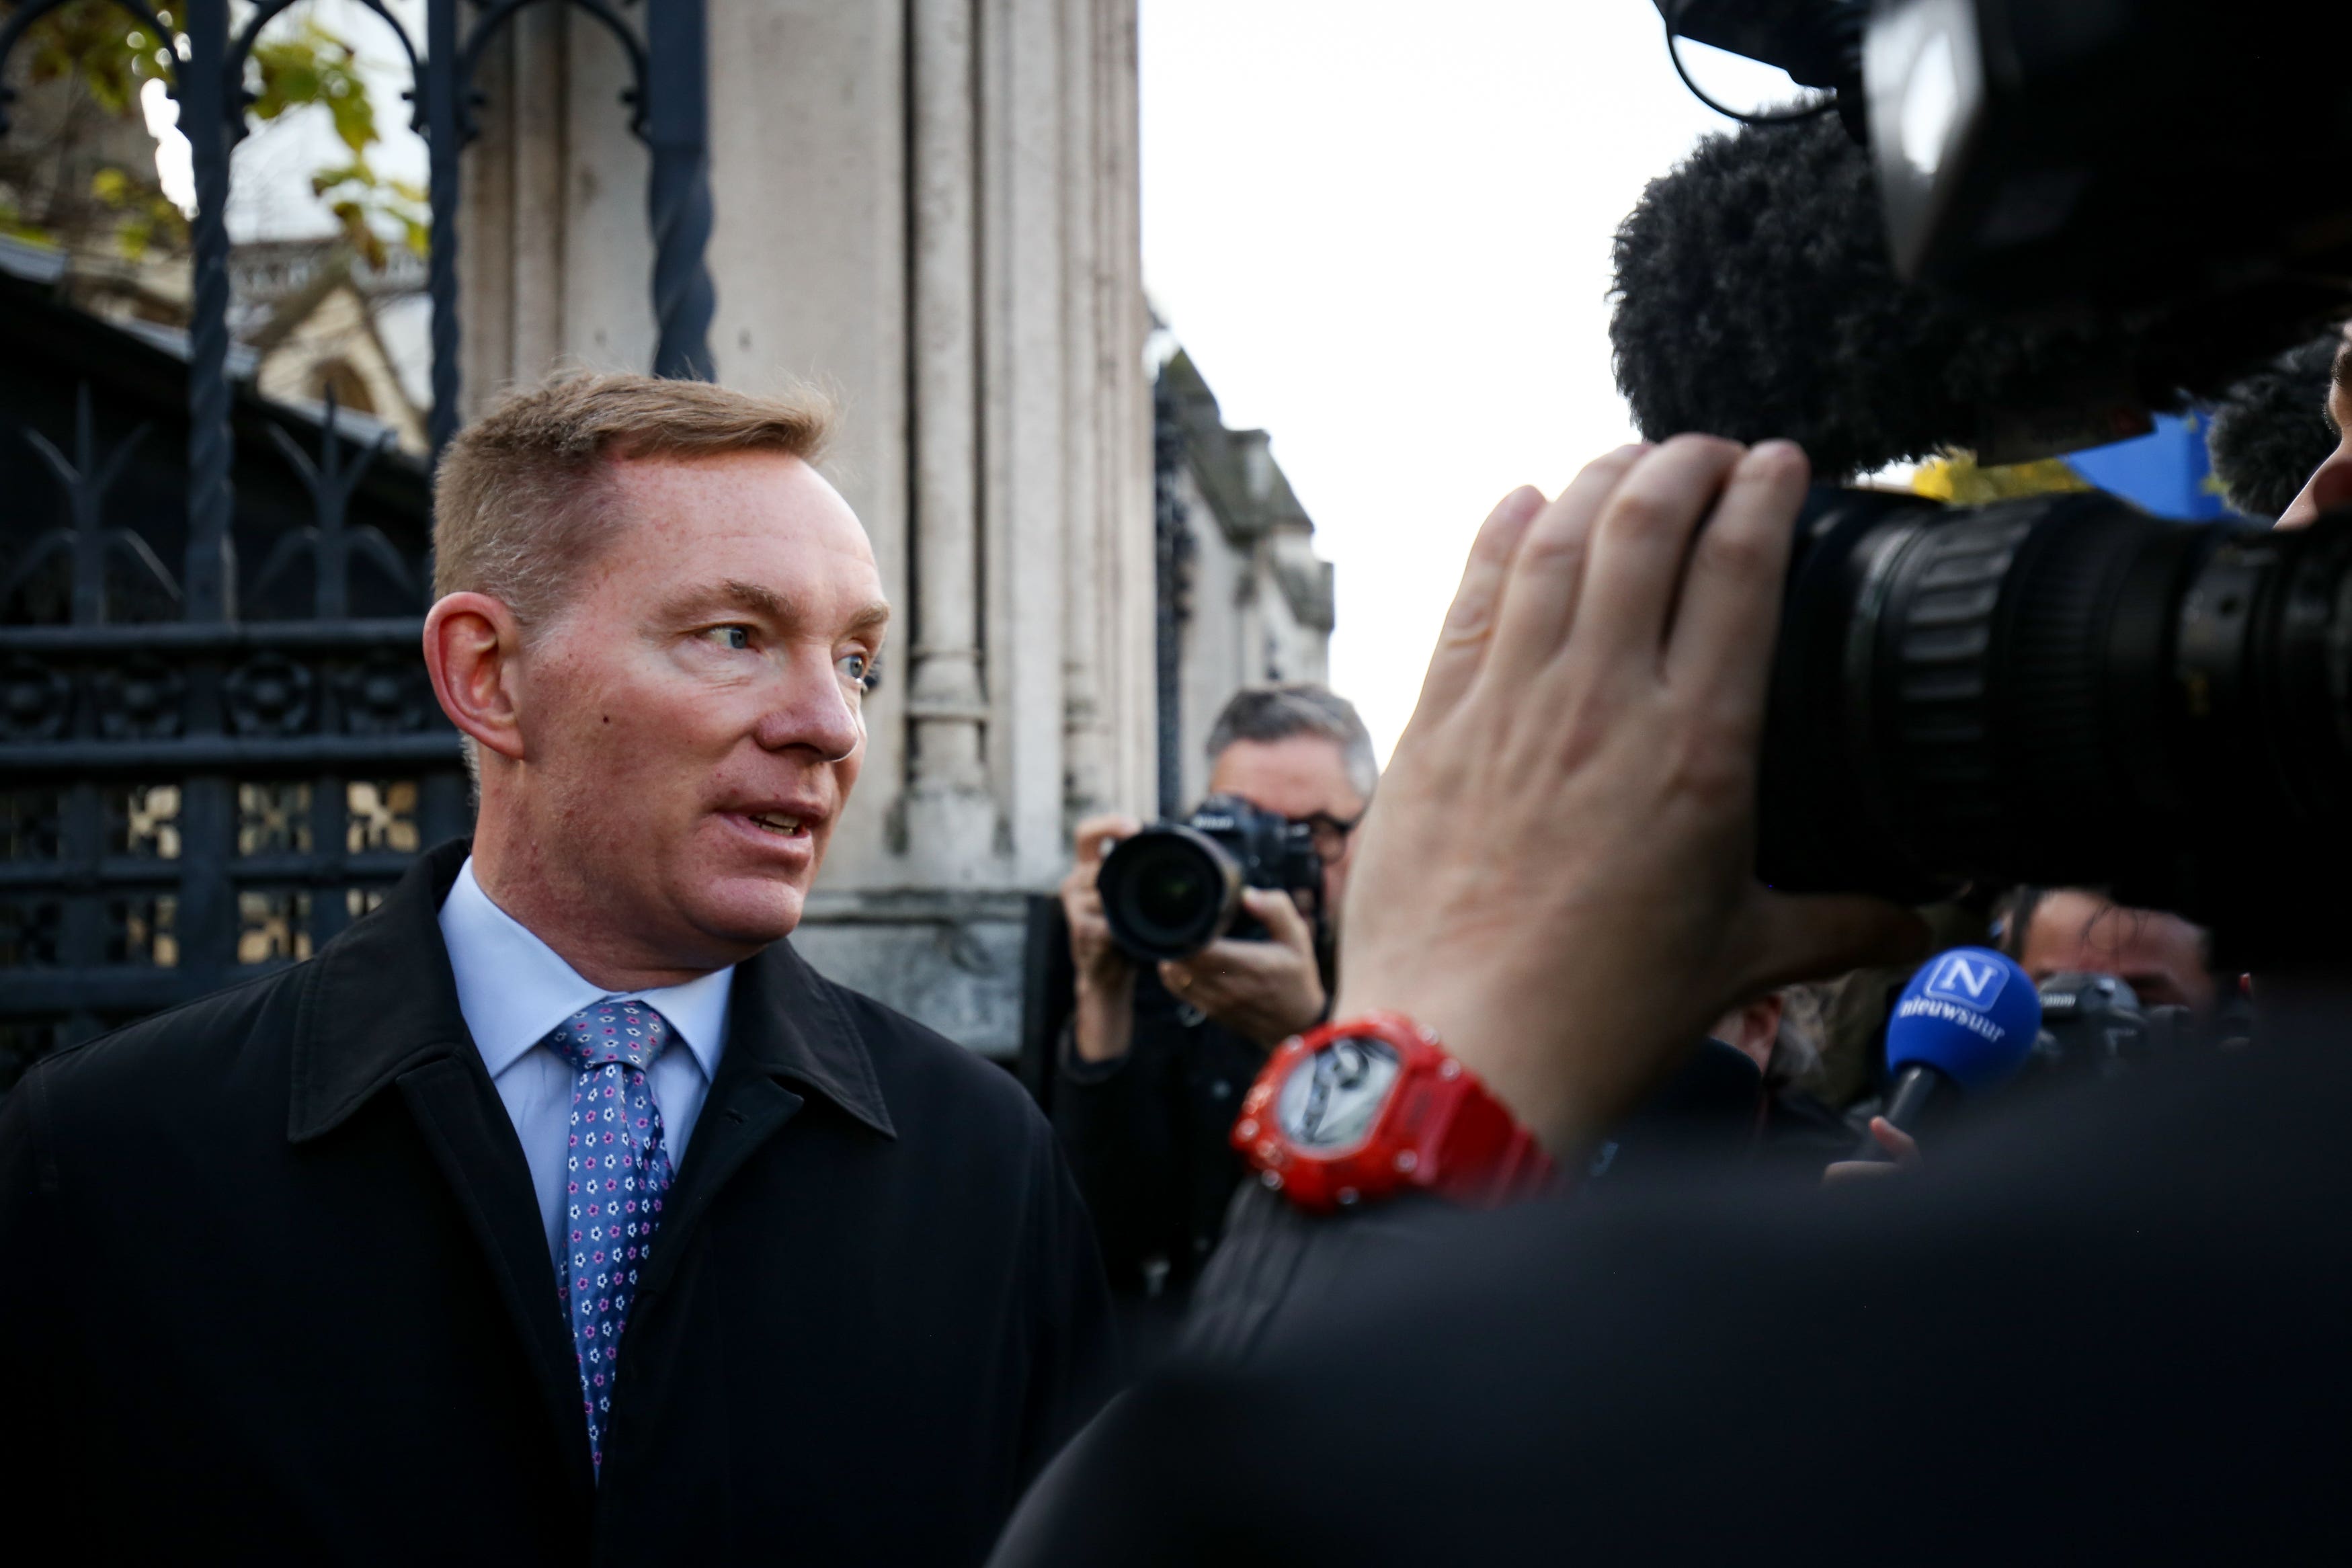 Chris Bryant received a knighthood in the New Year Honours